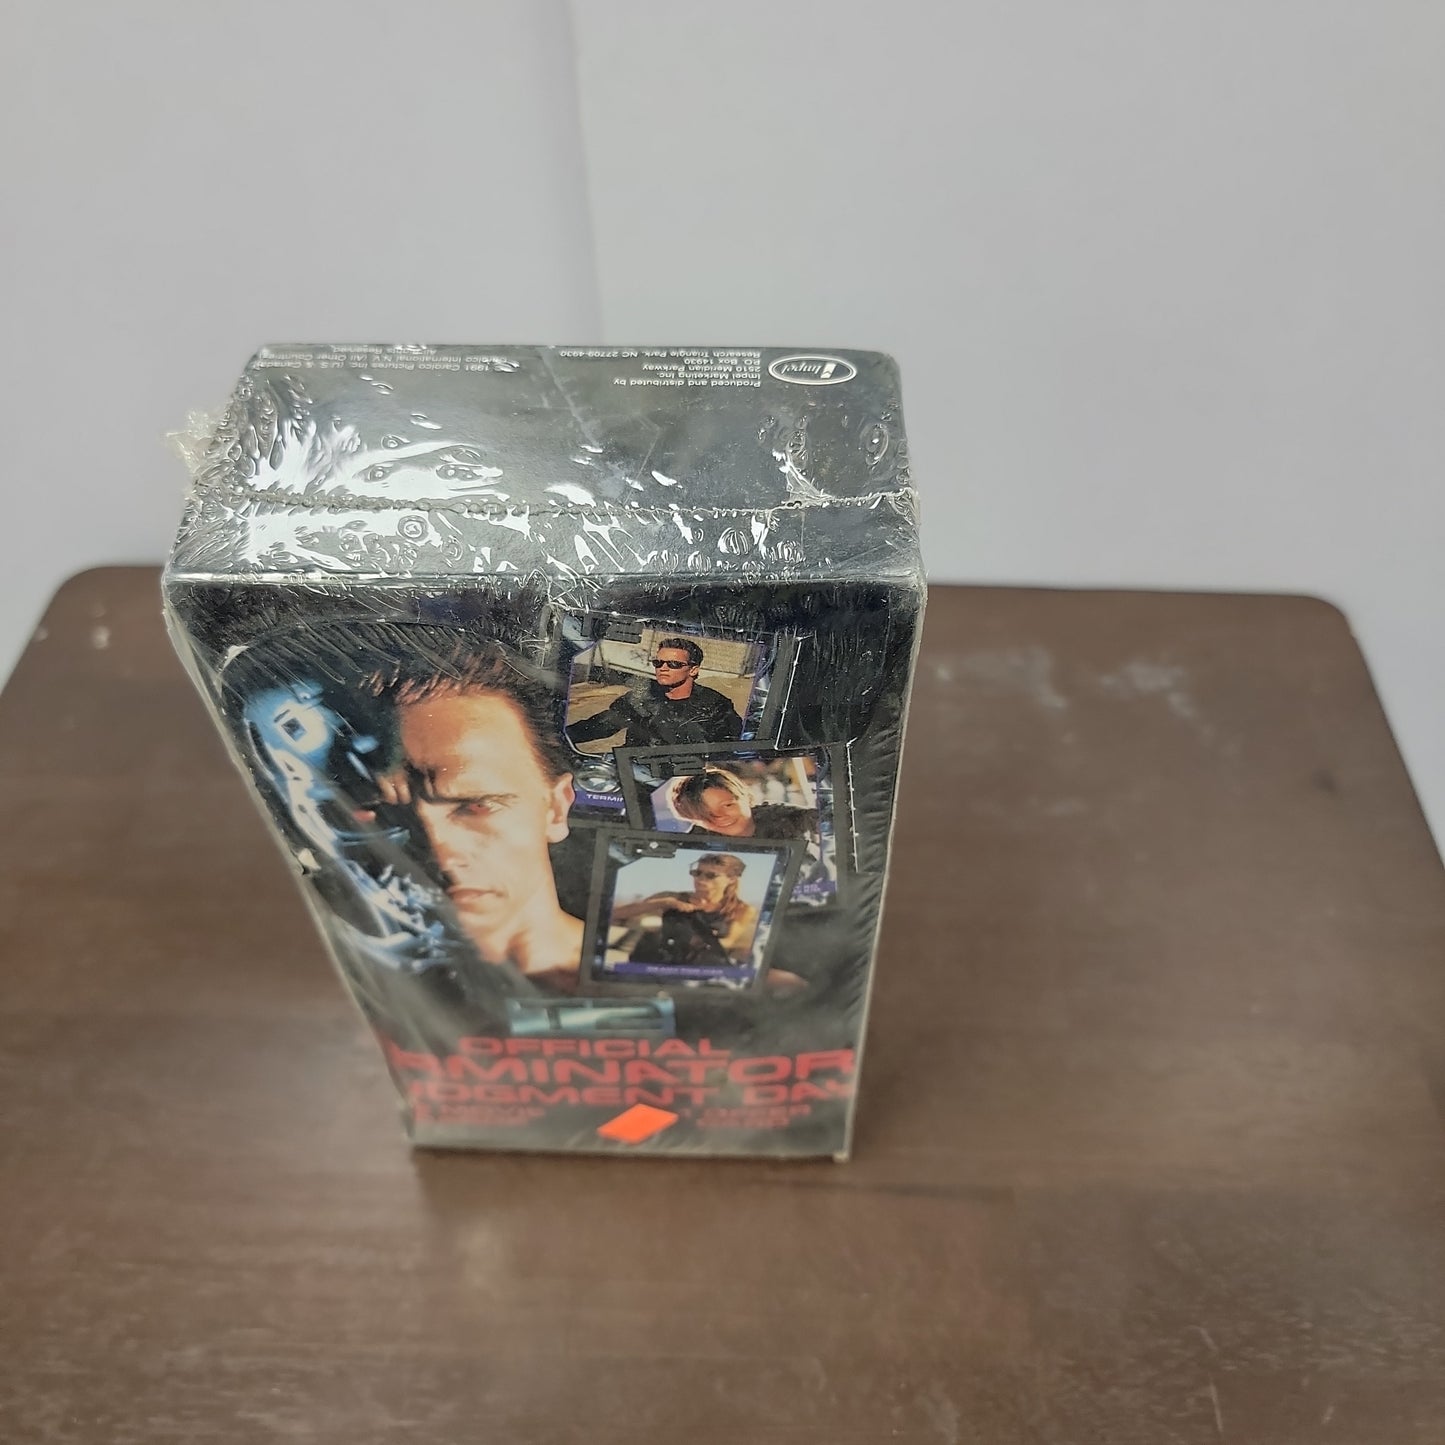 Official Terminator Judgment Day Movie Cards Sealed